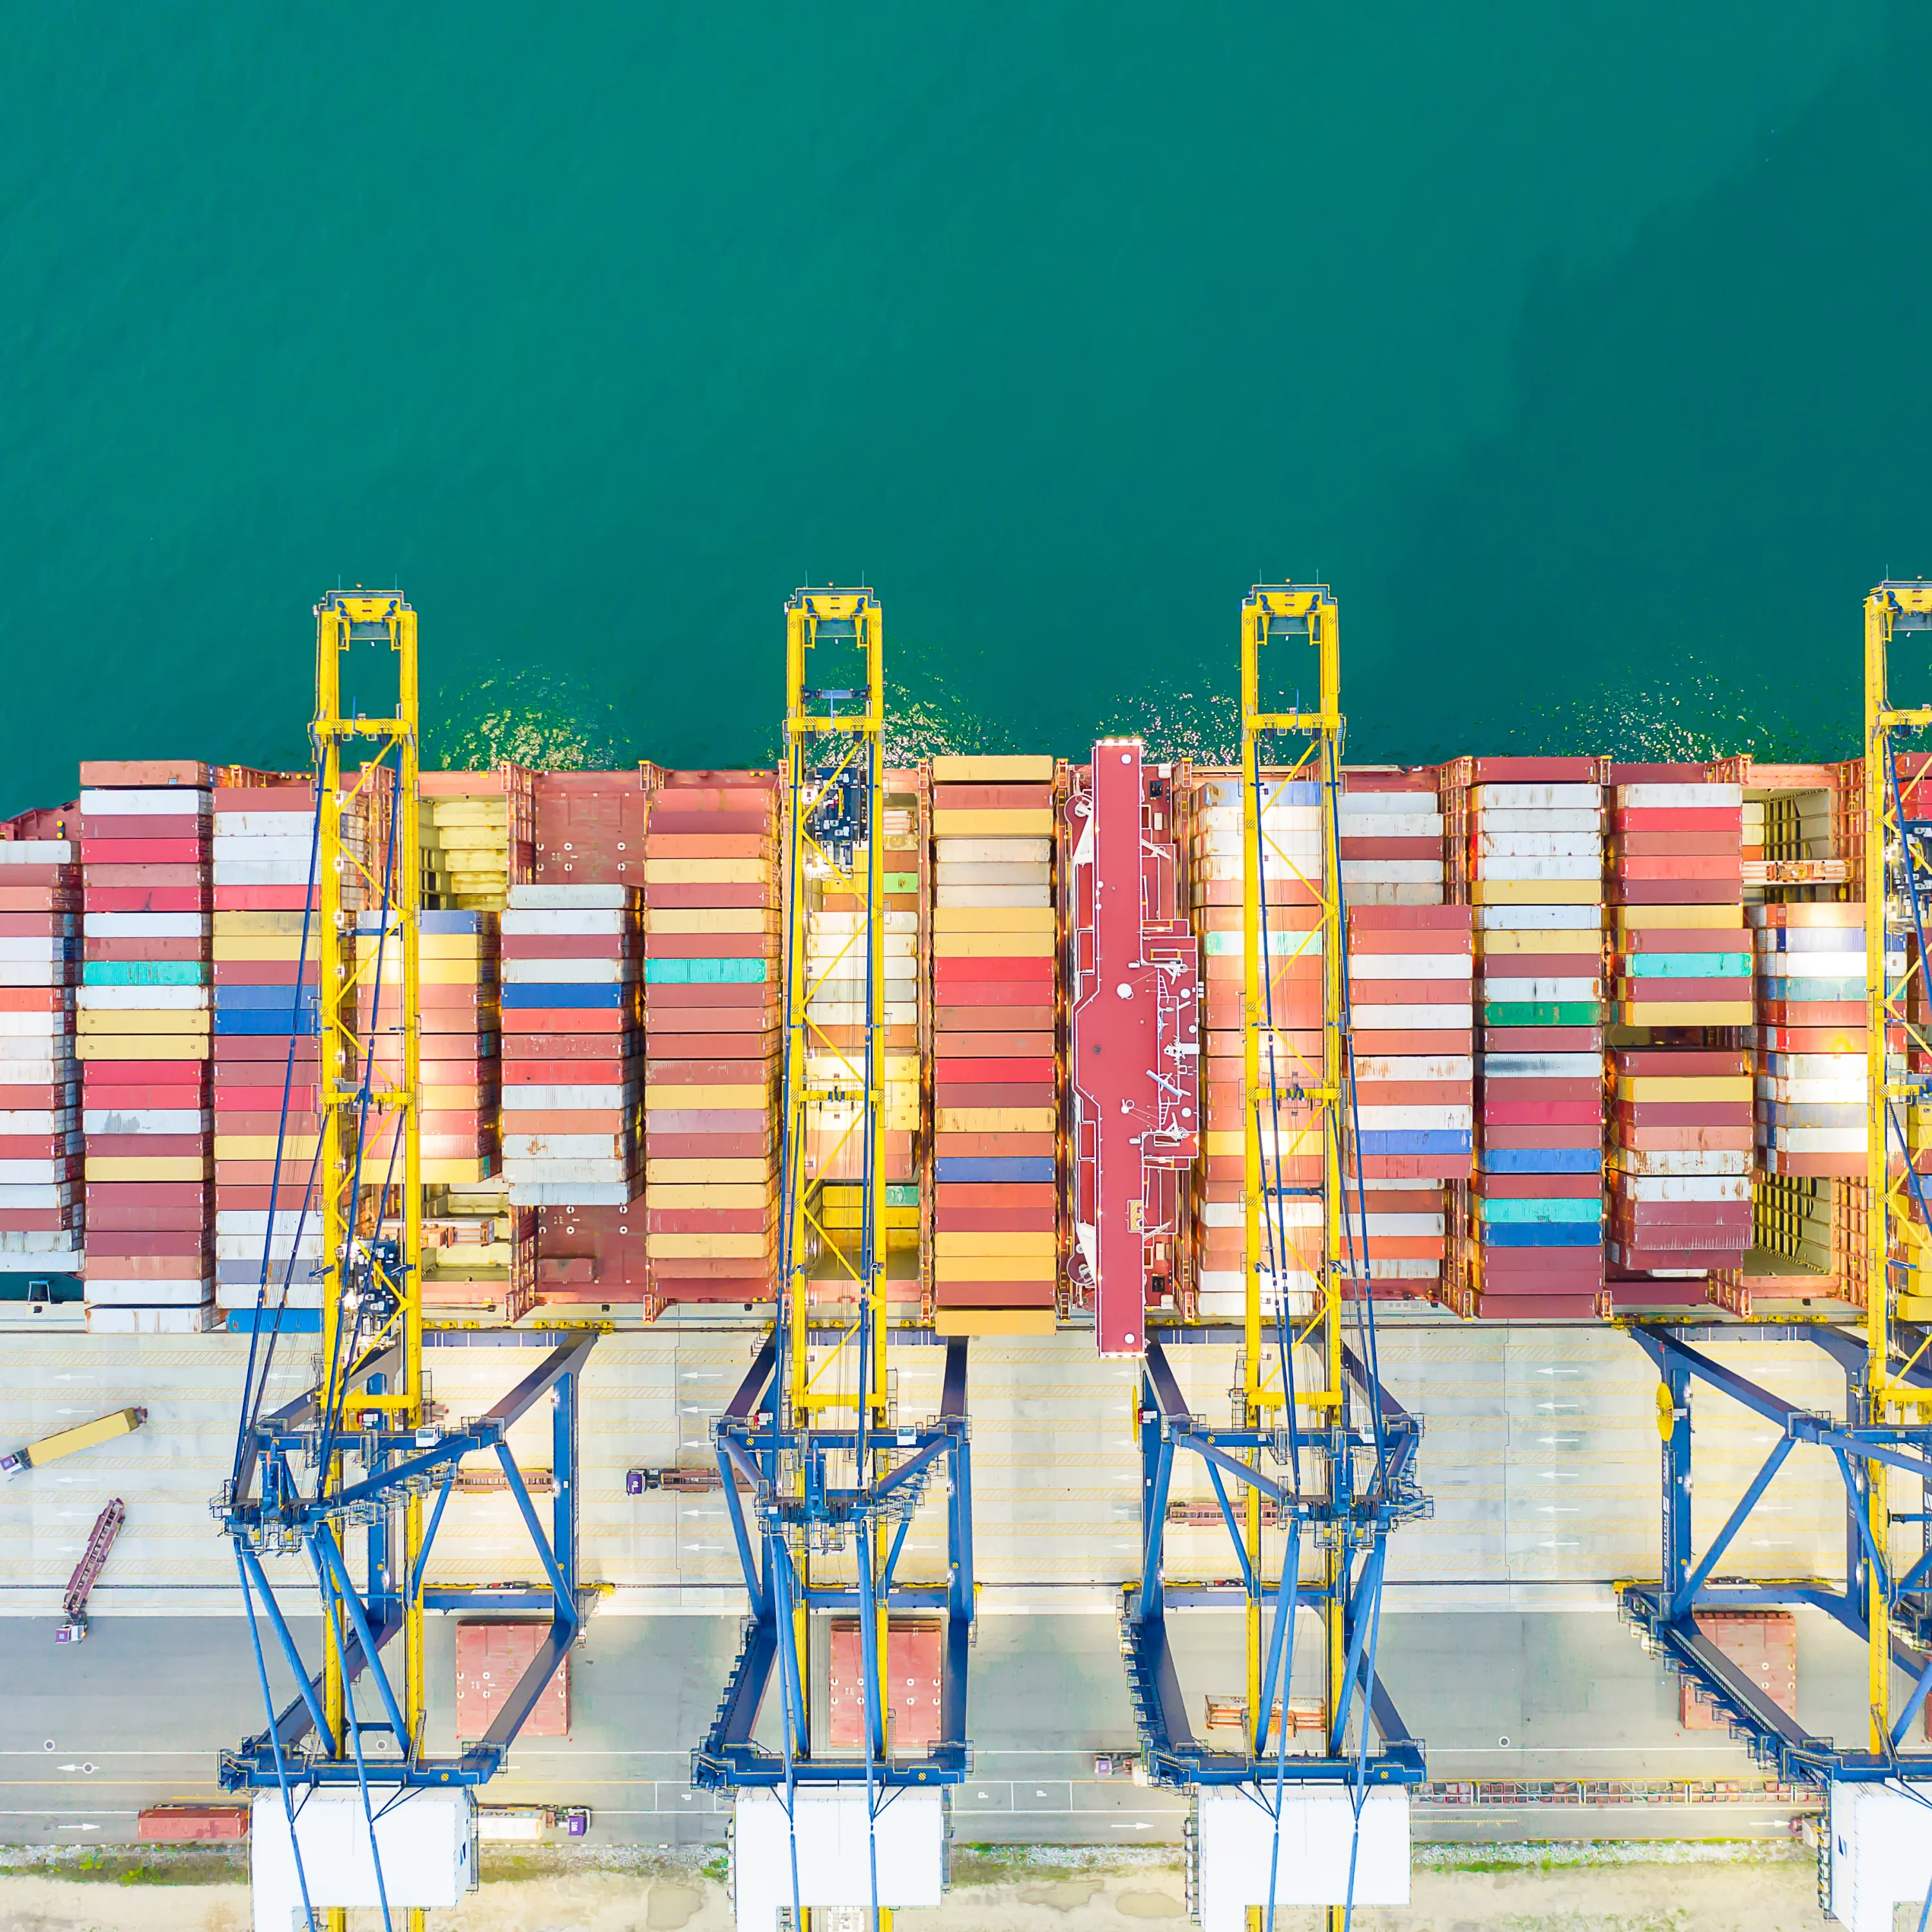 Container ships, cranes, and logistics fuel the import-export business, connecting global trade and maritime transport.